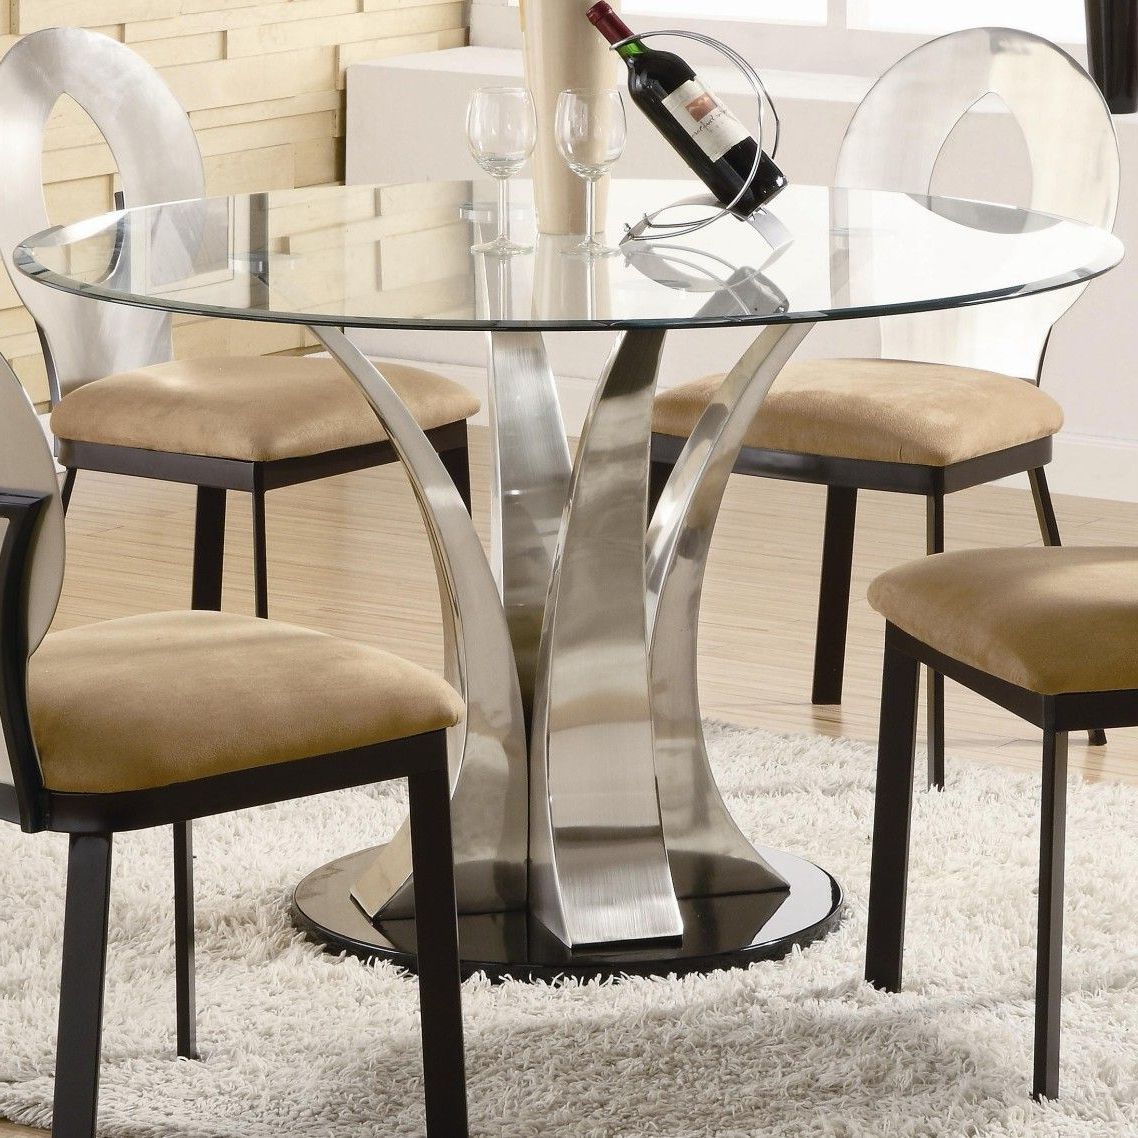 Awesome Modern Glass Top Dining Table With Chrome Metal Regarding Latest Eames Style Dining Tables With Chromed Leg And Tempered Glass Top (View 15 of 25)